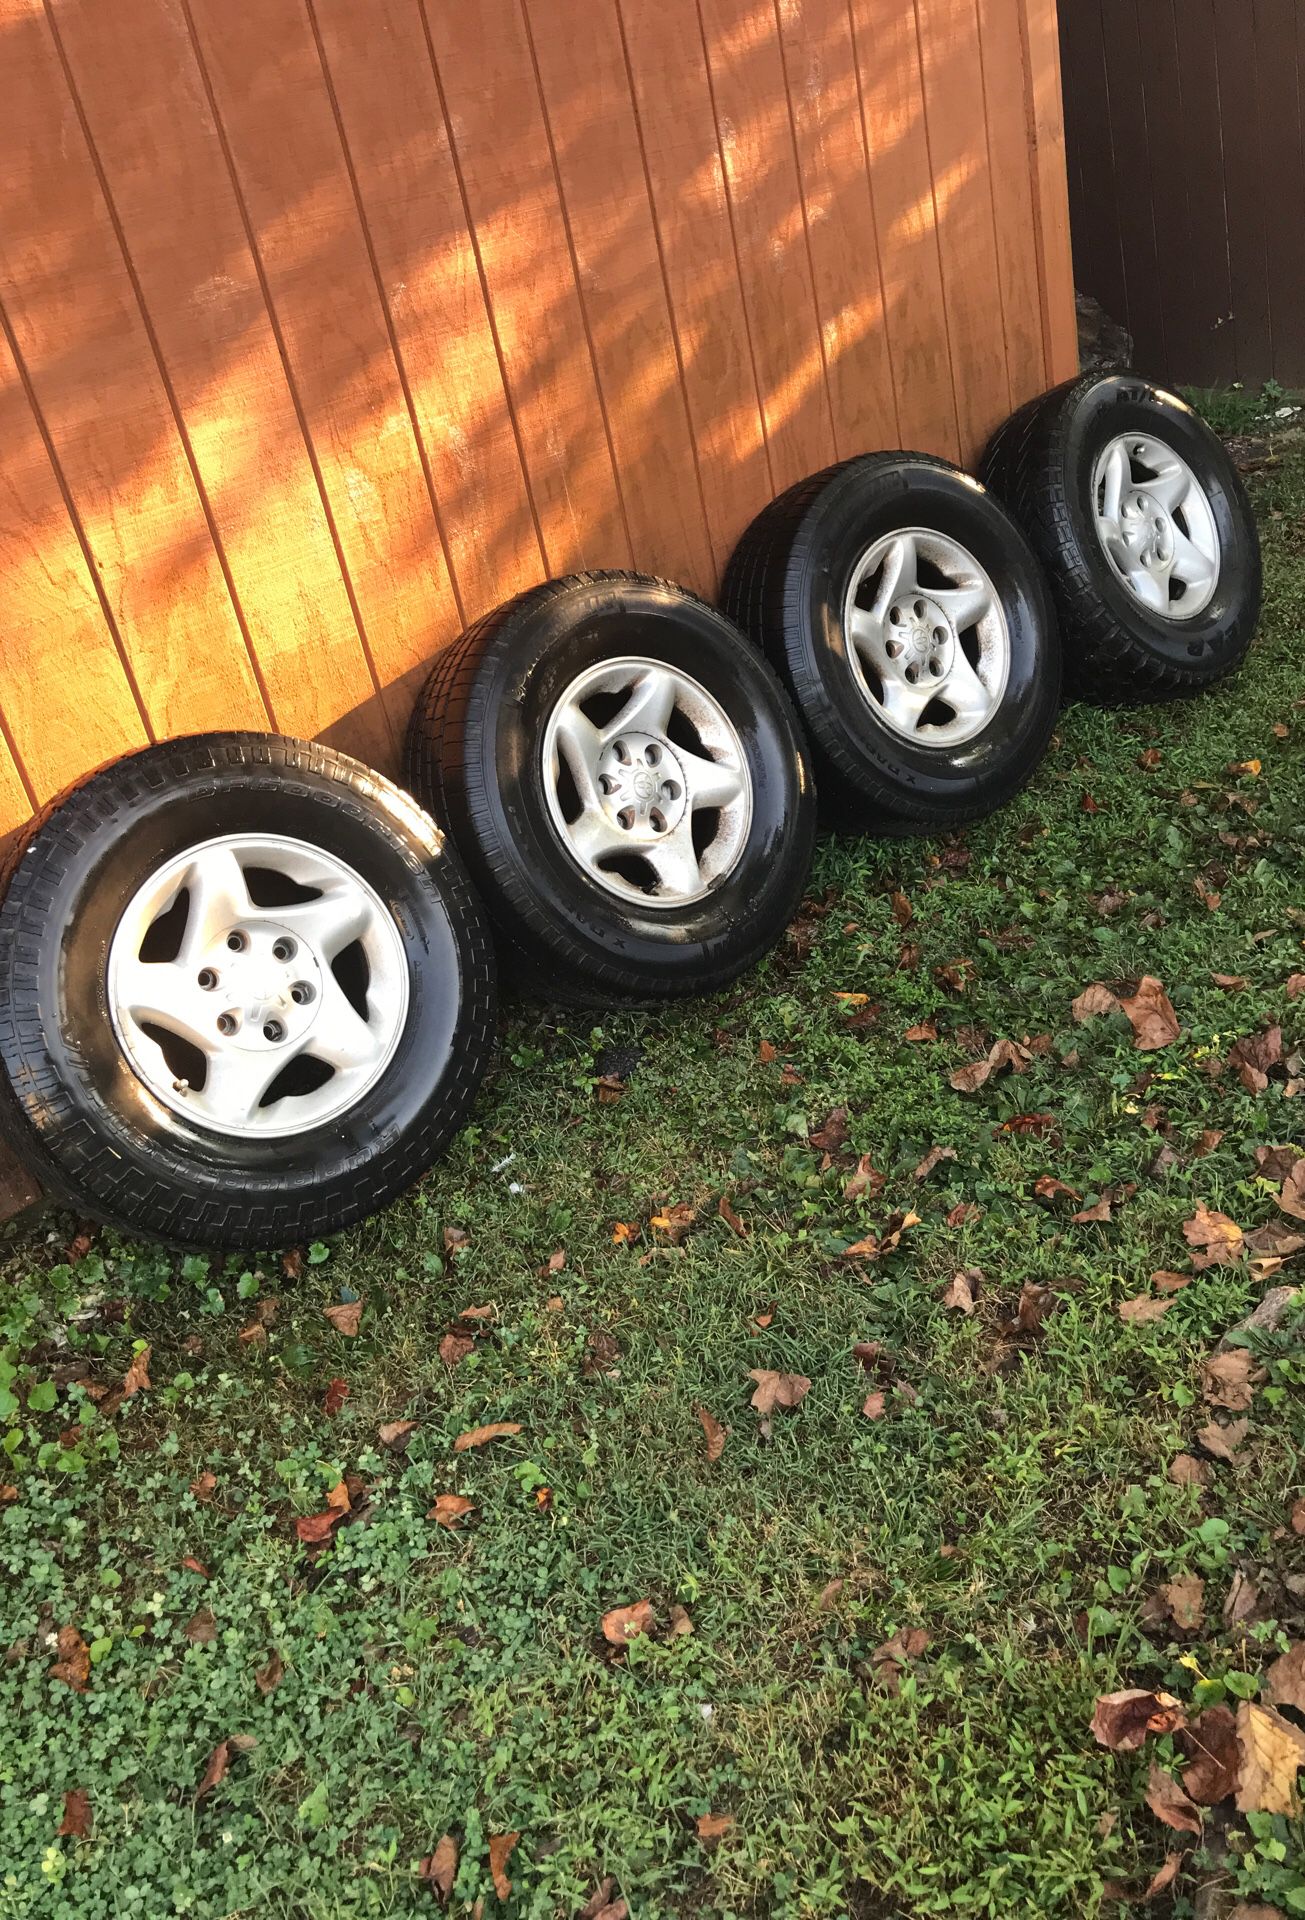 4 Michelin Toyota’s tires and Rims